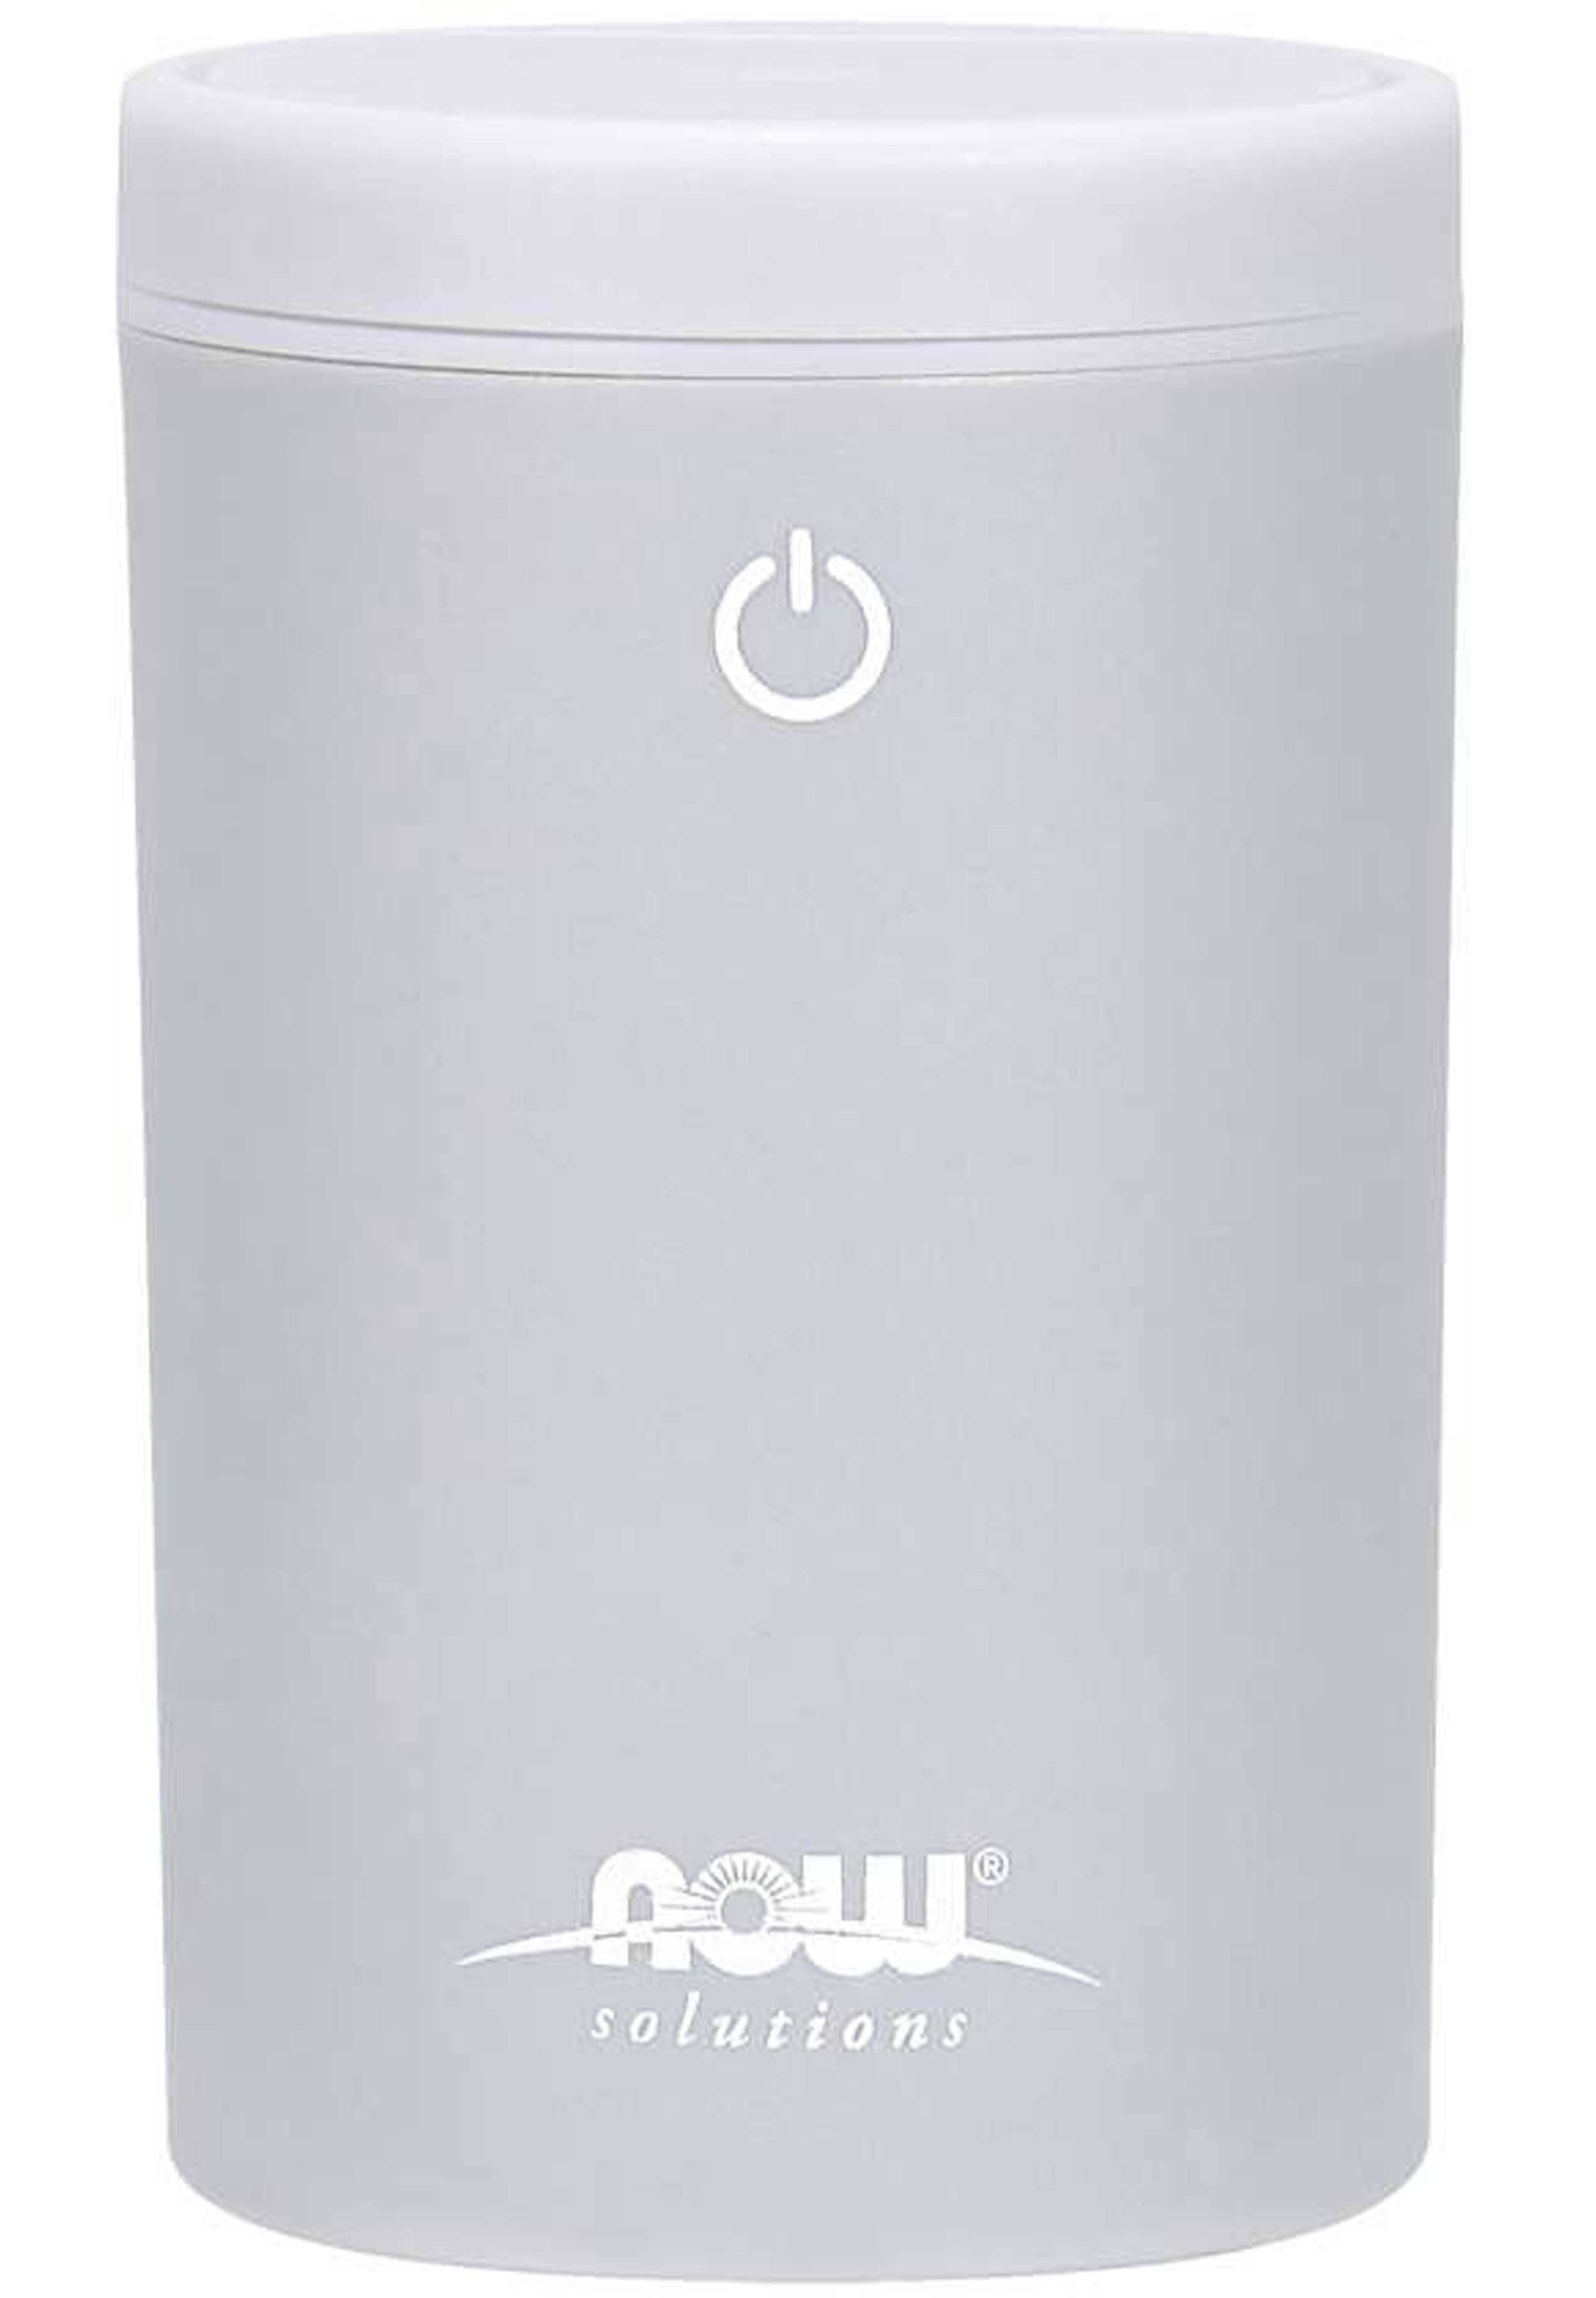 NOW Foods Portable USB Ultrasonic Oil Diffuser